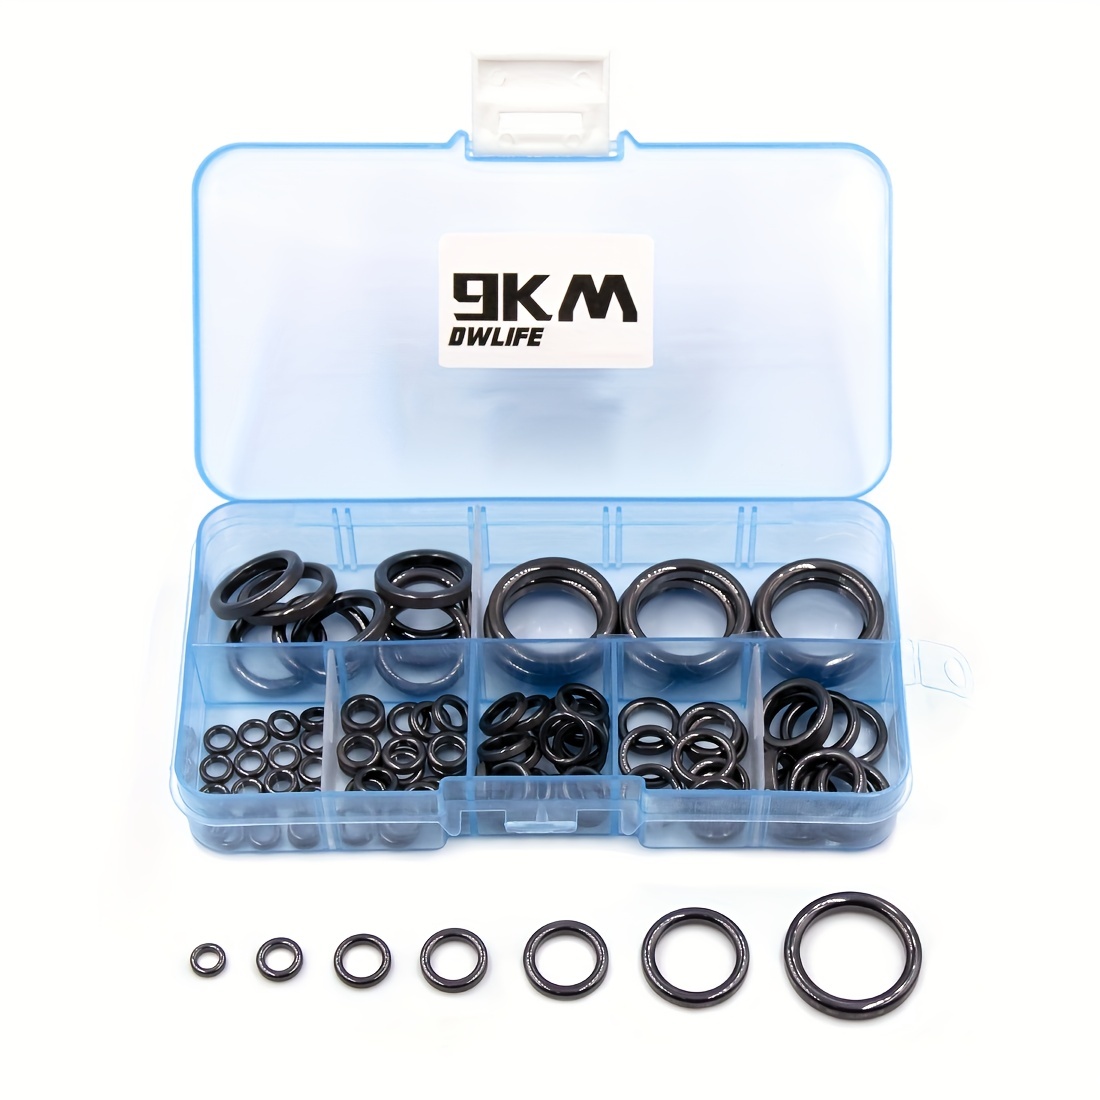  CWSDXM Fishing Rod Repair Kit - 8 Sizes 65 PCS Rod Guides for Fishing  Rods with Ceramic Ring Rod Guides Tips and Double Feet Pole Guide  Replacement Kit, Wrapping Thread